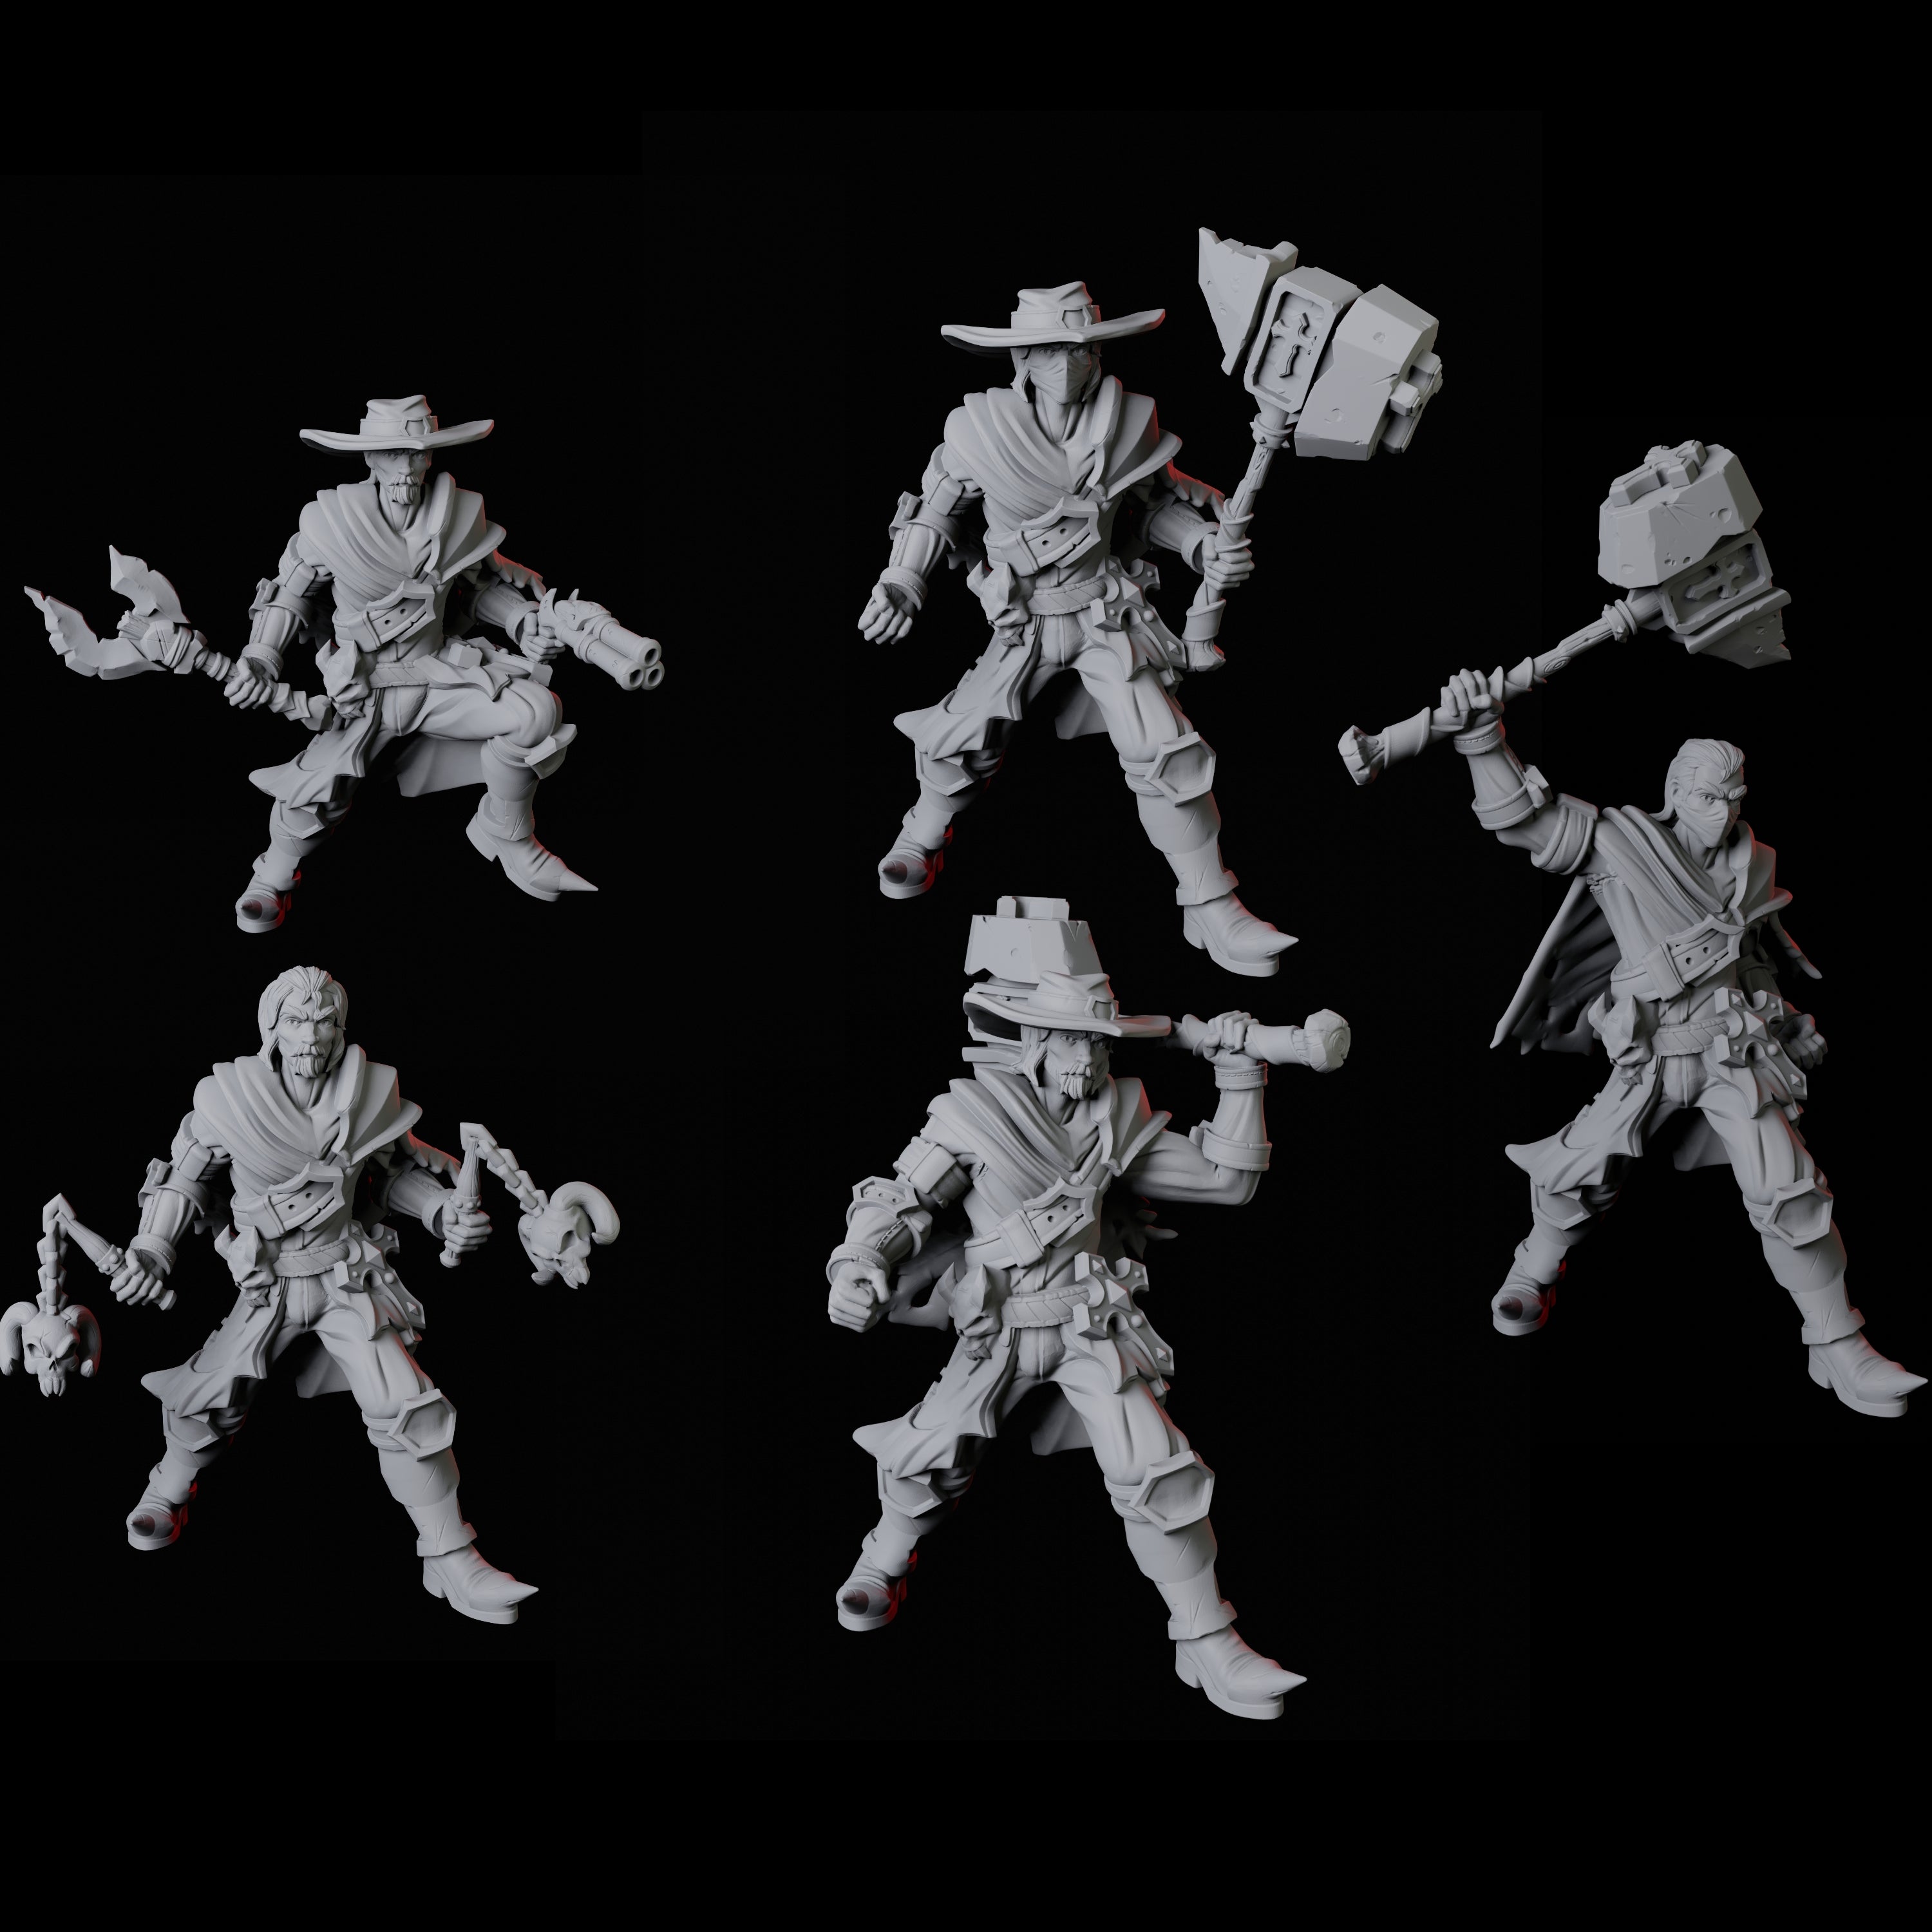 Band of Armed Ruffians Miniature for Dungeons and Dragons, Pathfinder or other TTRPGs